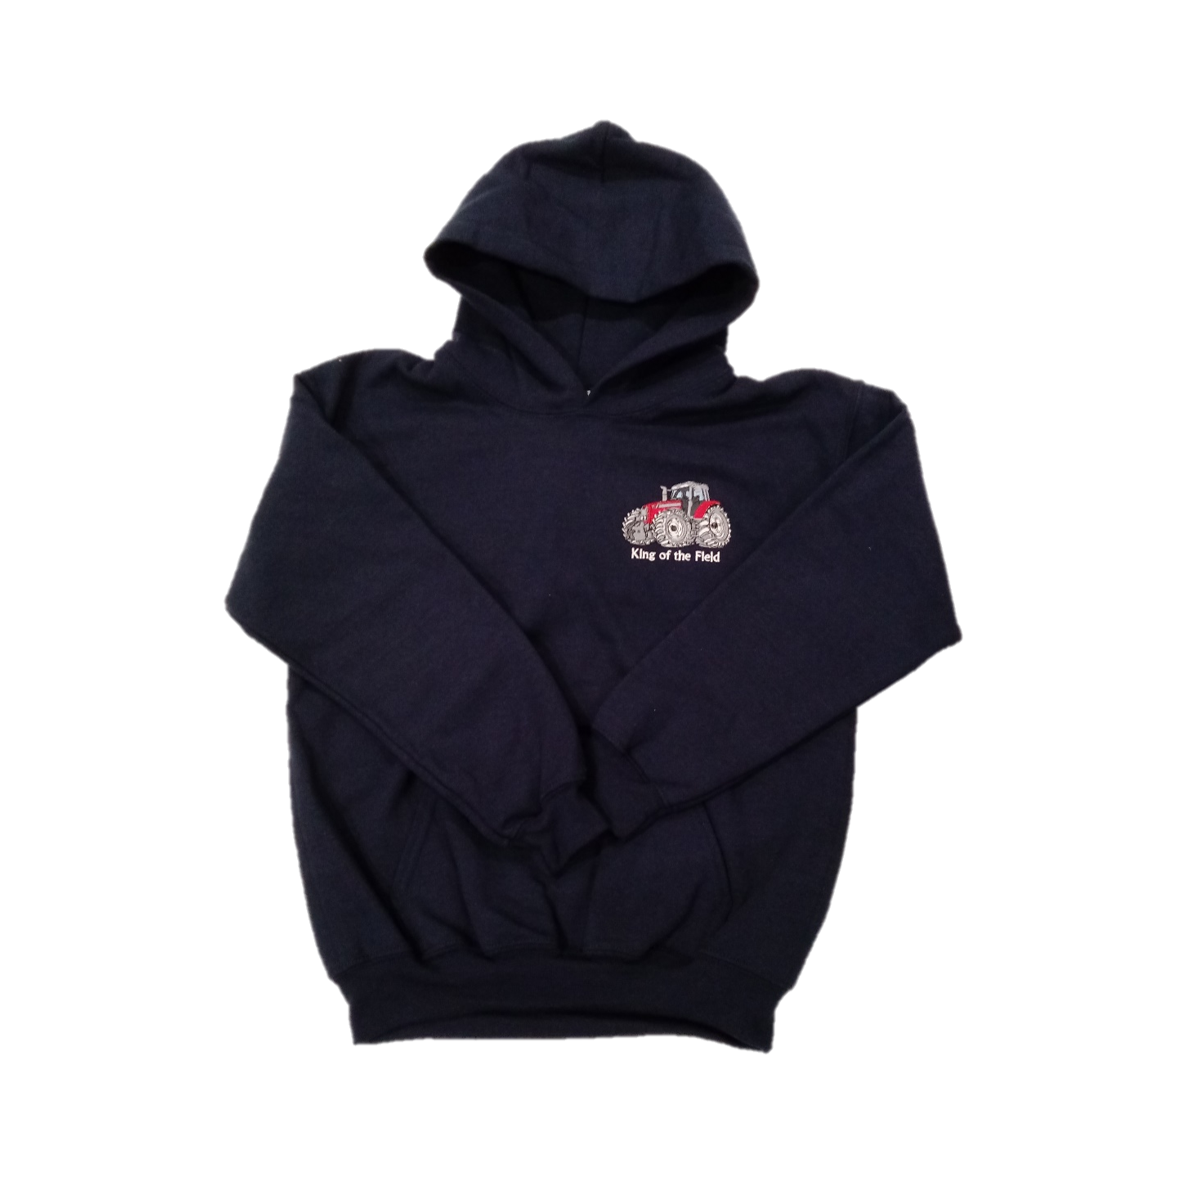 CHILDRENS NAVY HOODY WITH LOGO - McCabe Feeds